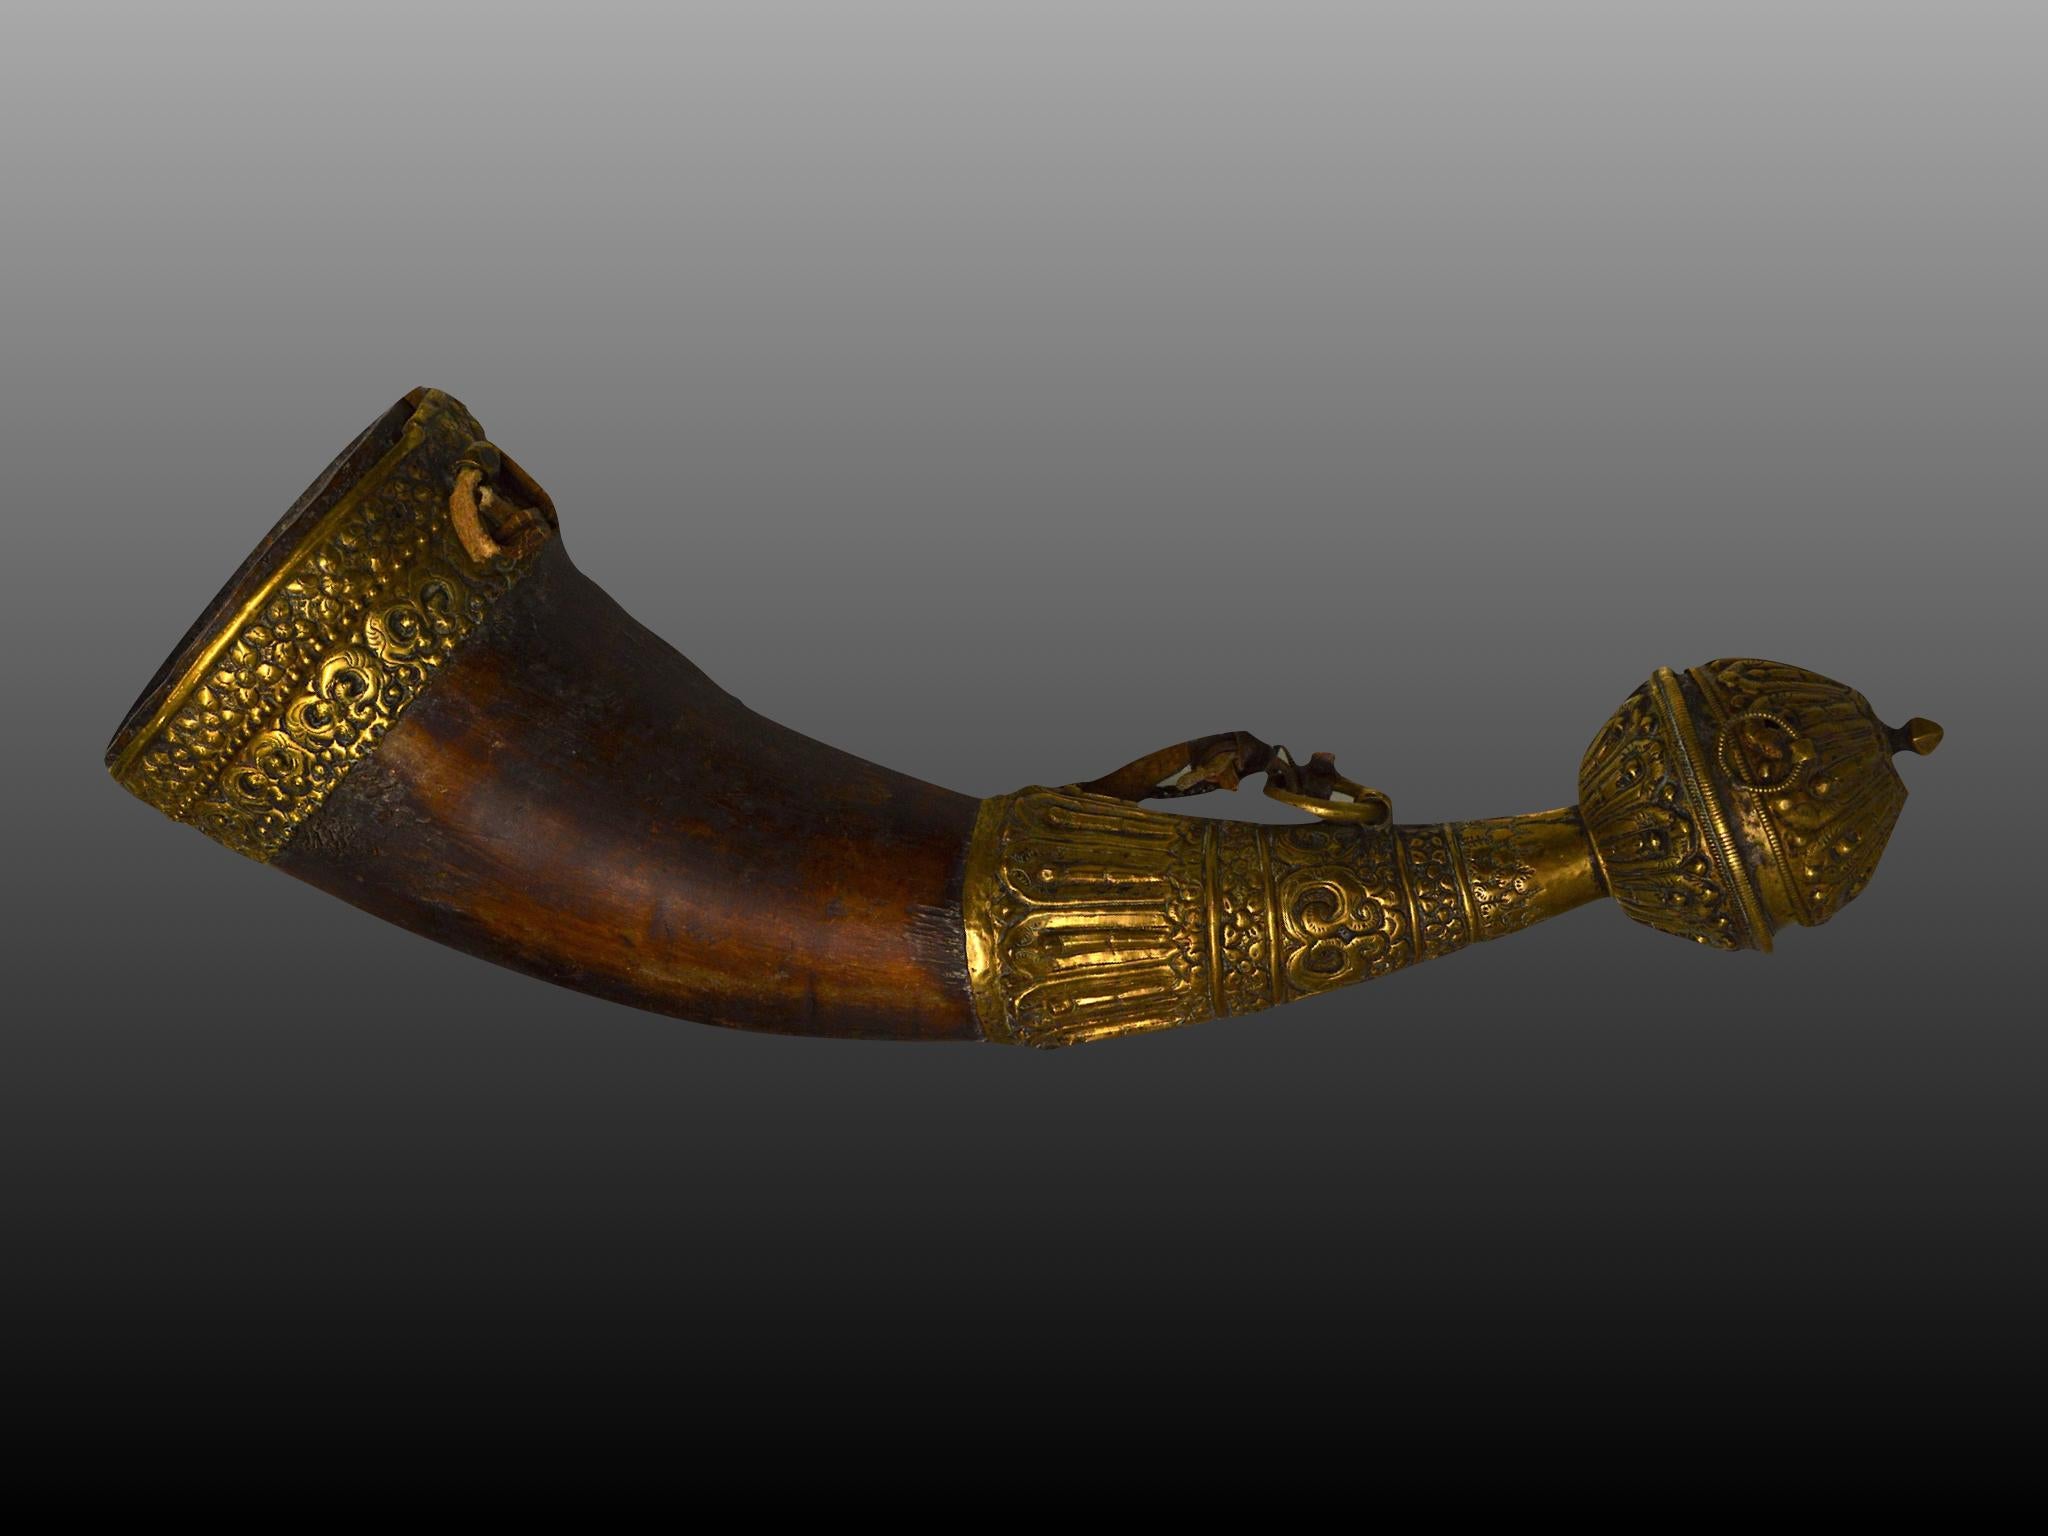 Tibet, greater Himalayas, circa 19th century. Horn mounted in gilded copper decorated with lotus petals. The yak horn has a natural curved shape and a small funnel for filling the horn at the end. The fittings are decorated with wave-and